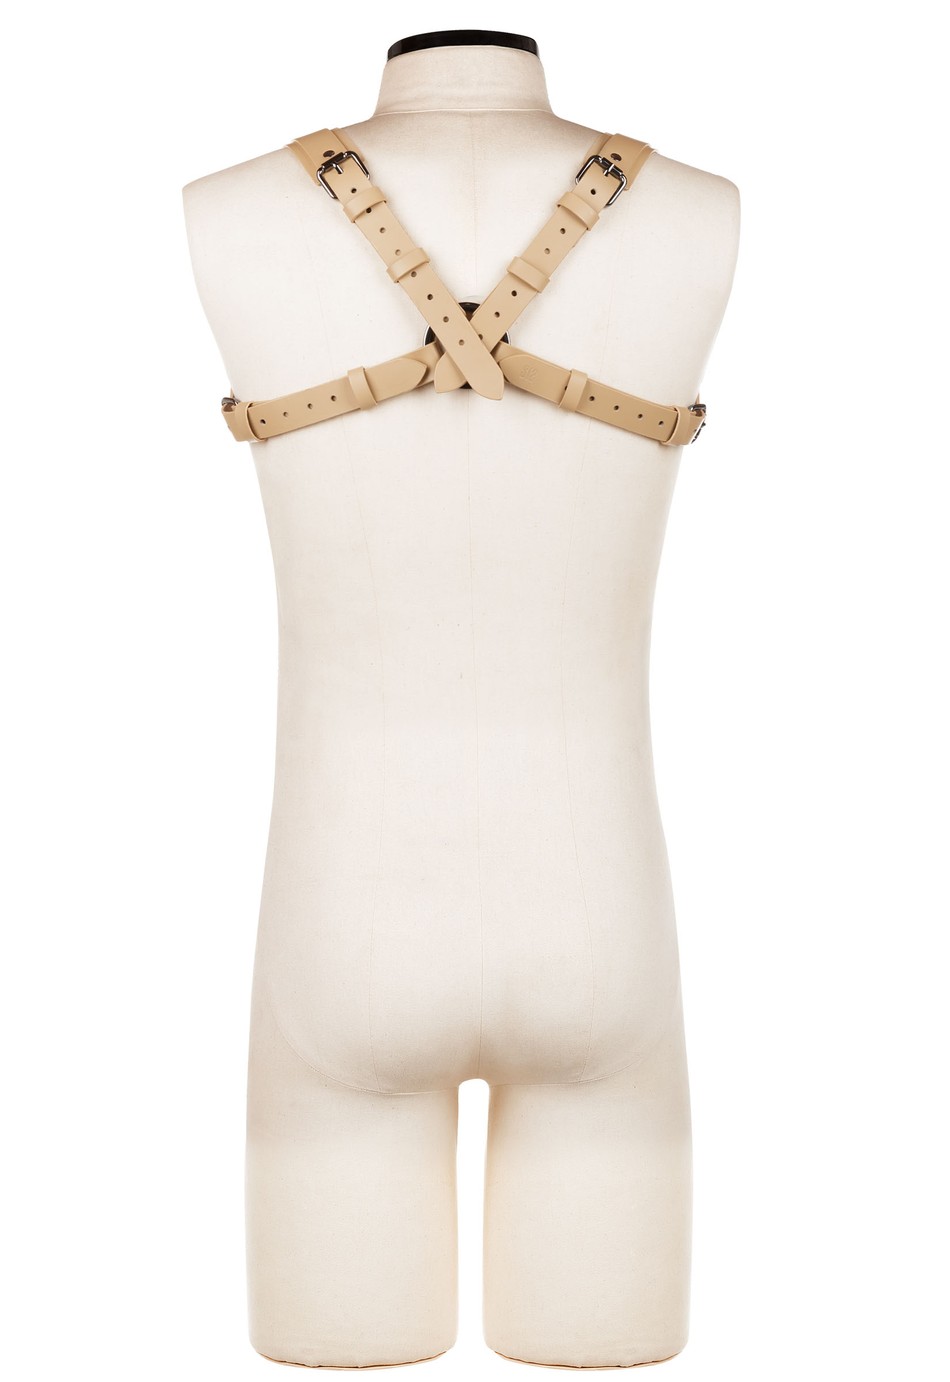 Harness Peitoral SEVERE bege